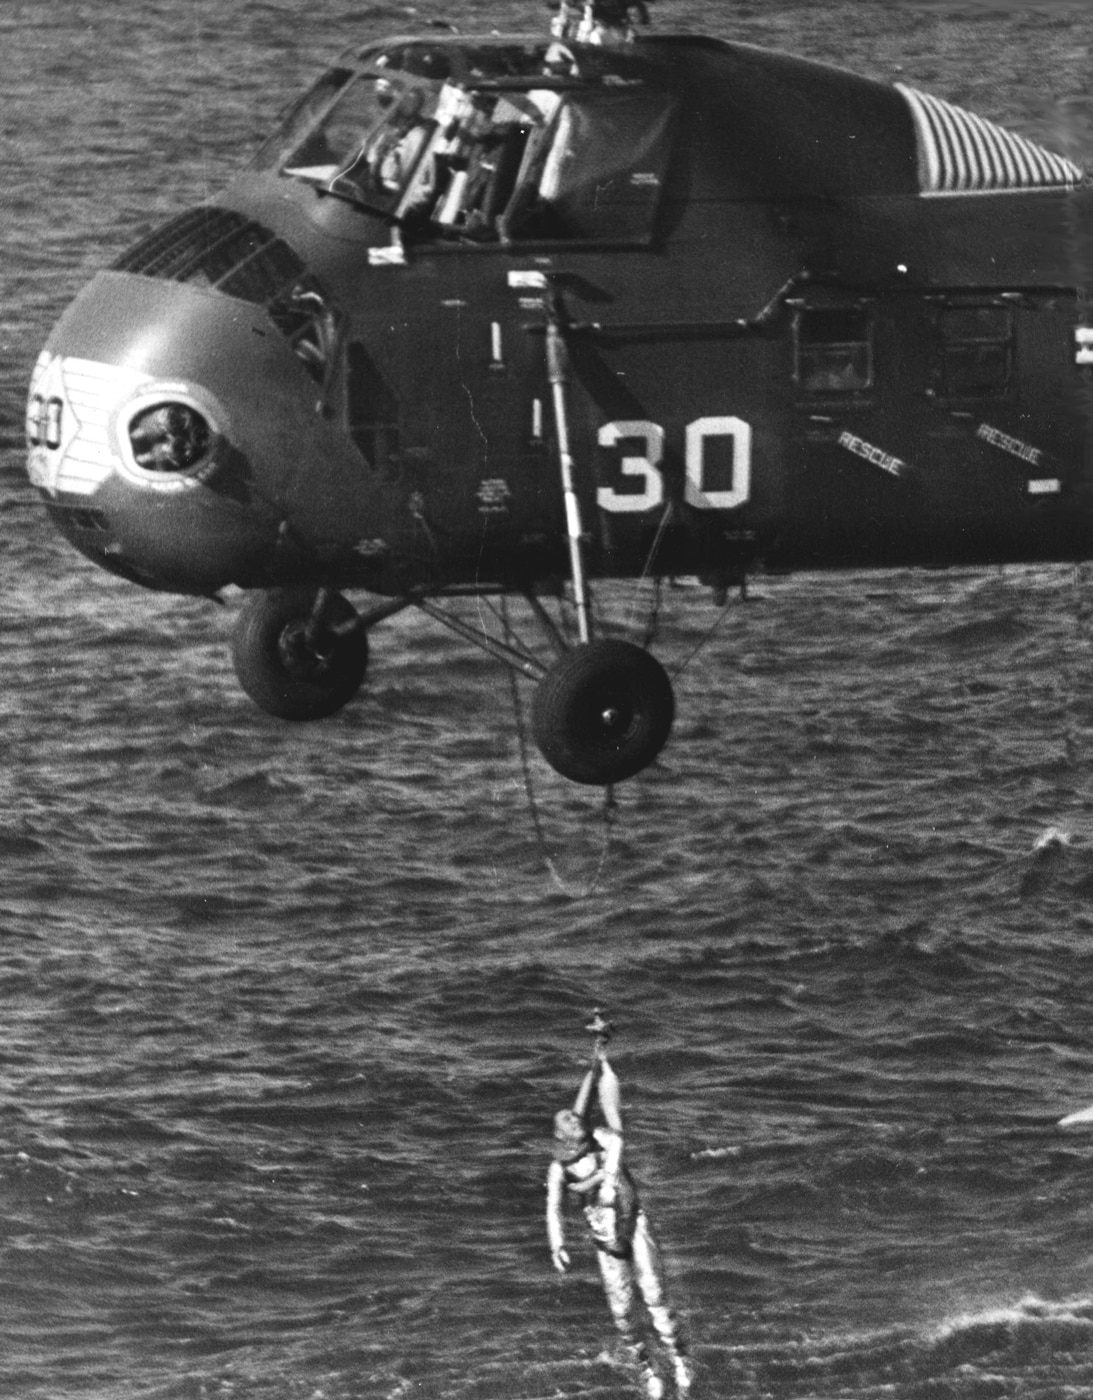 NASA astronaut Gus Grissom is rescued from the ocean by U.S. Marines in a HUS-1 Seahorse helicopter. The irony of the situation was the rescue helicopter is believed to have caused the capsule hatch to blow in the first place. NASA instead blamed Grissom and redesigned the hatch which had a direct impact on the Apollo 1 disaster in which Grissom and two other astronauts died in a fire on the launchpad.